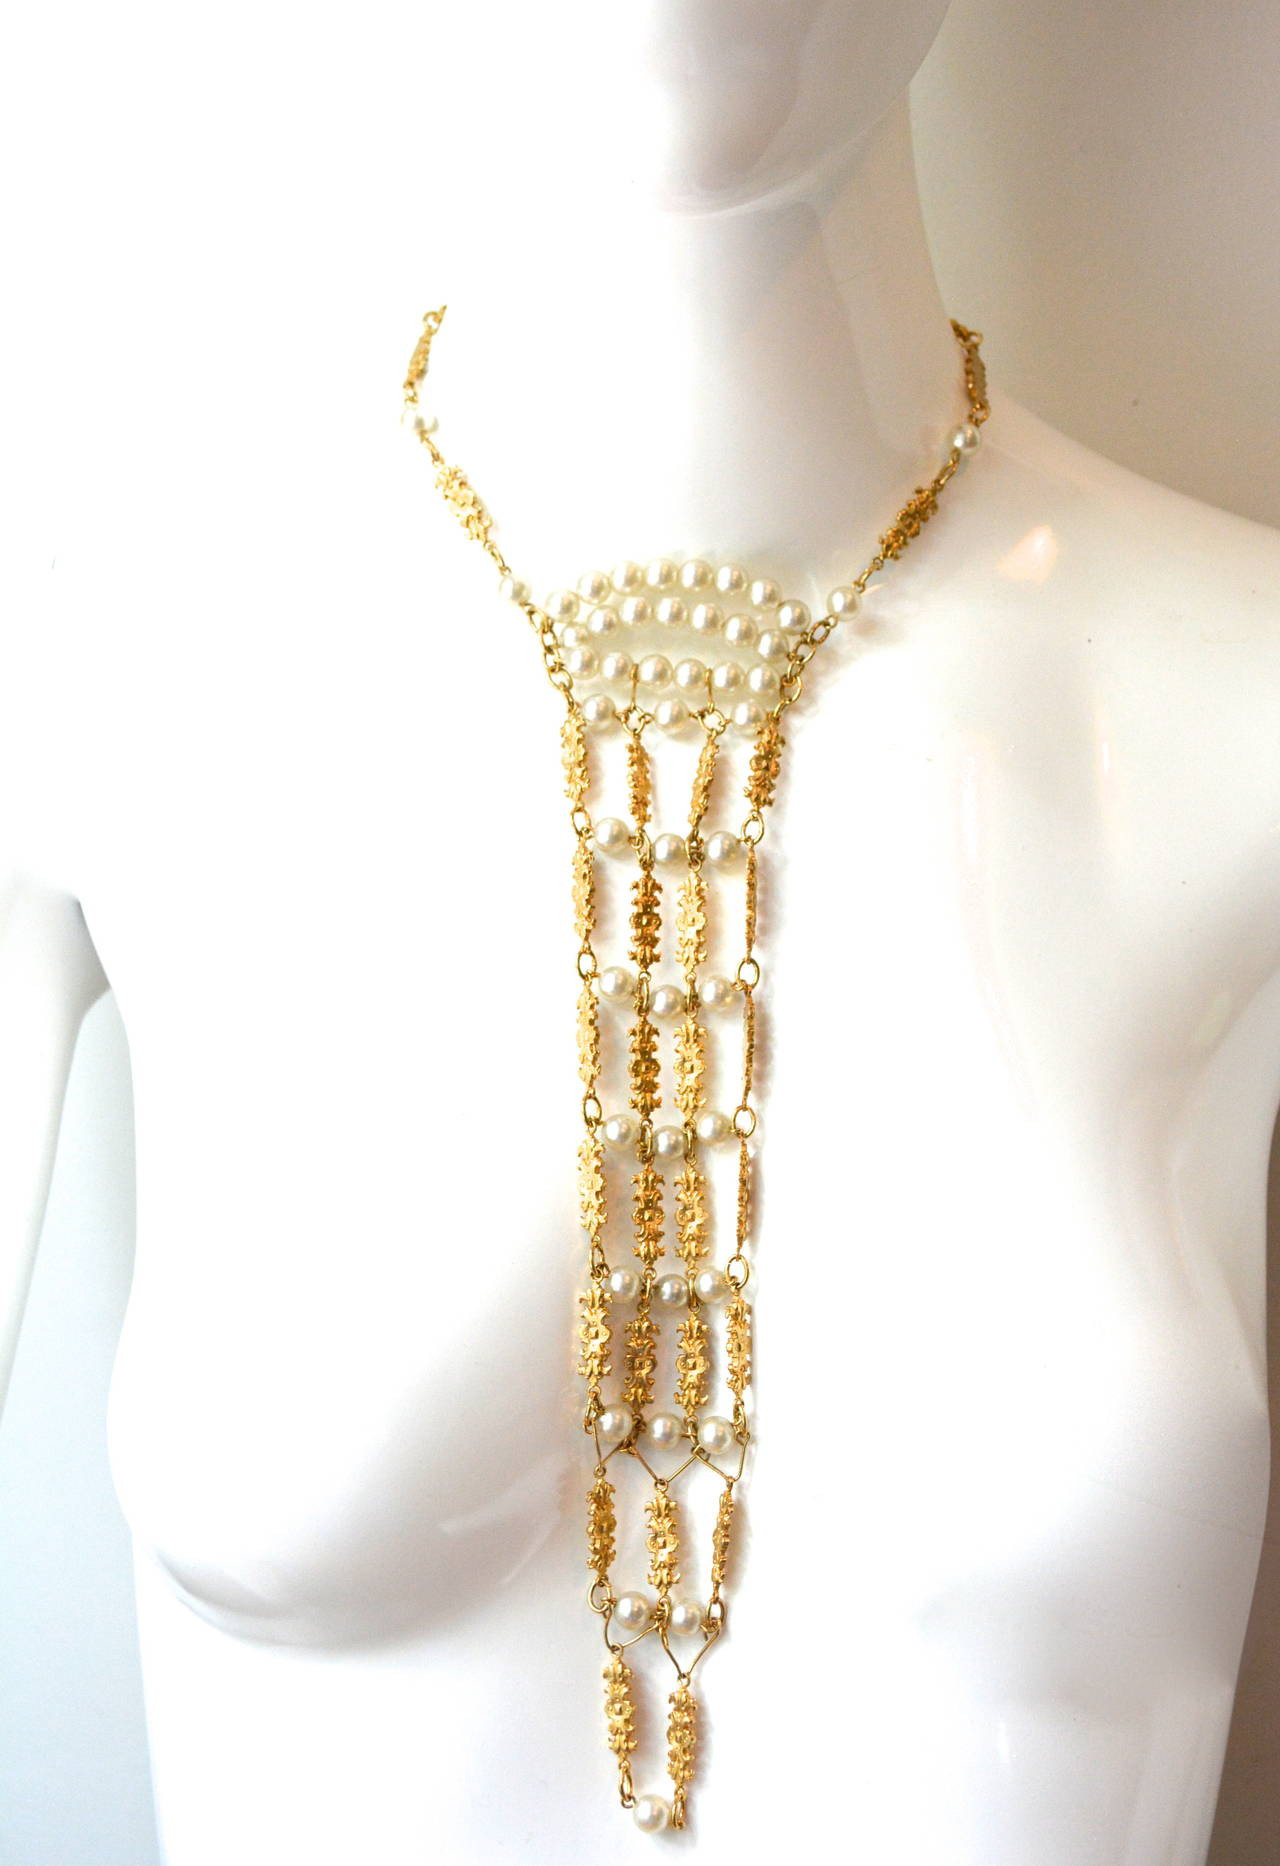 Pearl Body Jewelry
 1960s Mod Pearl Body Jewelry Necklace For Sale at 1stdibs